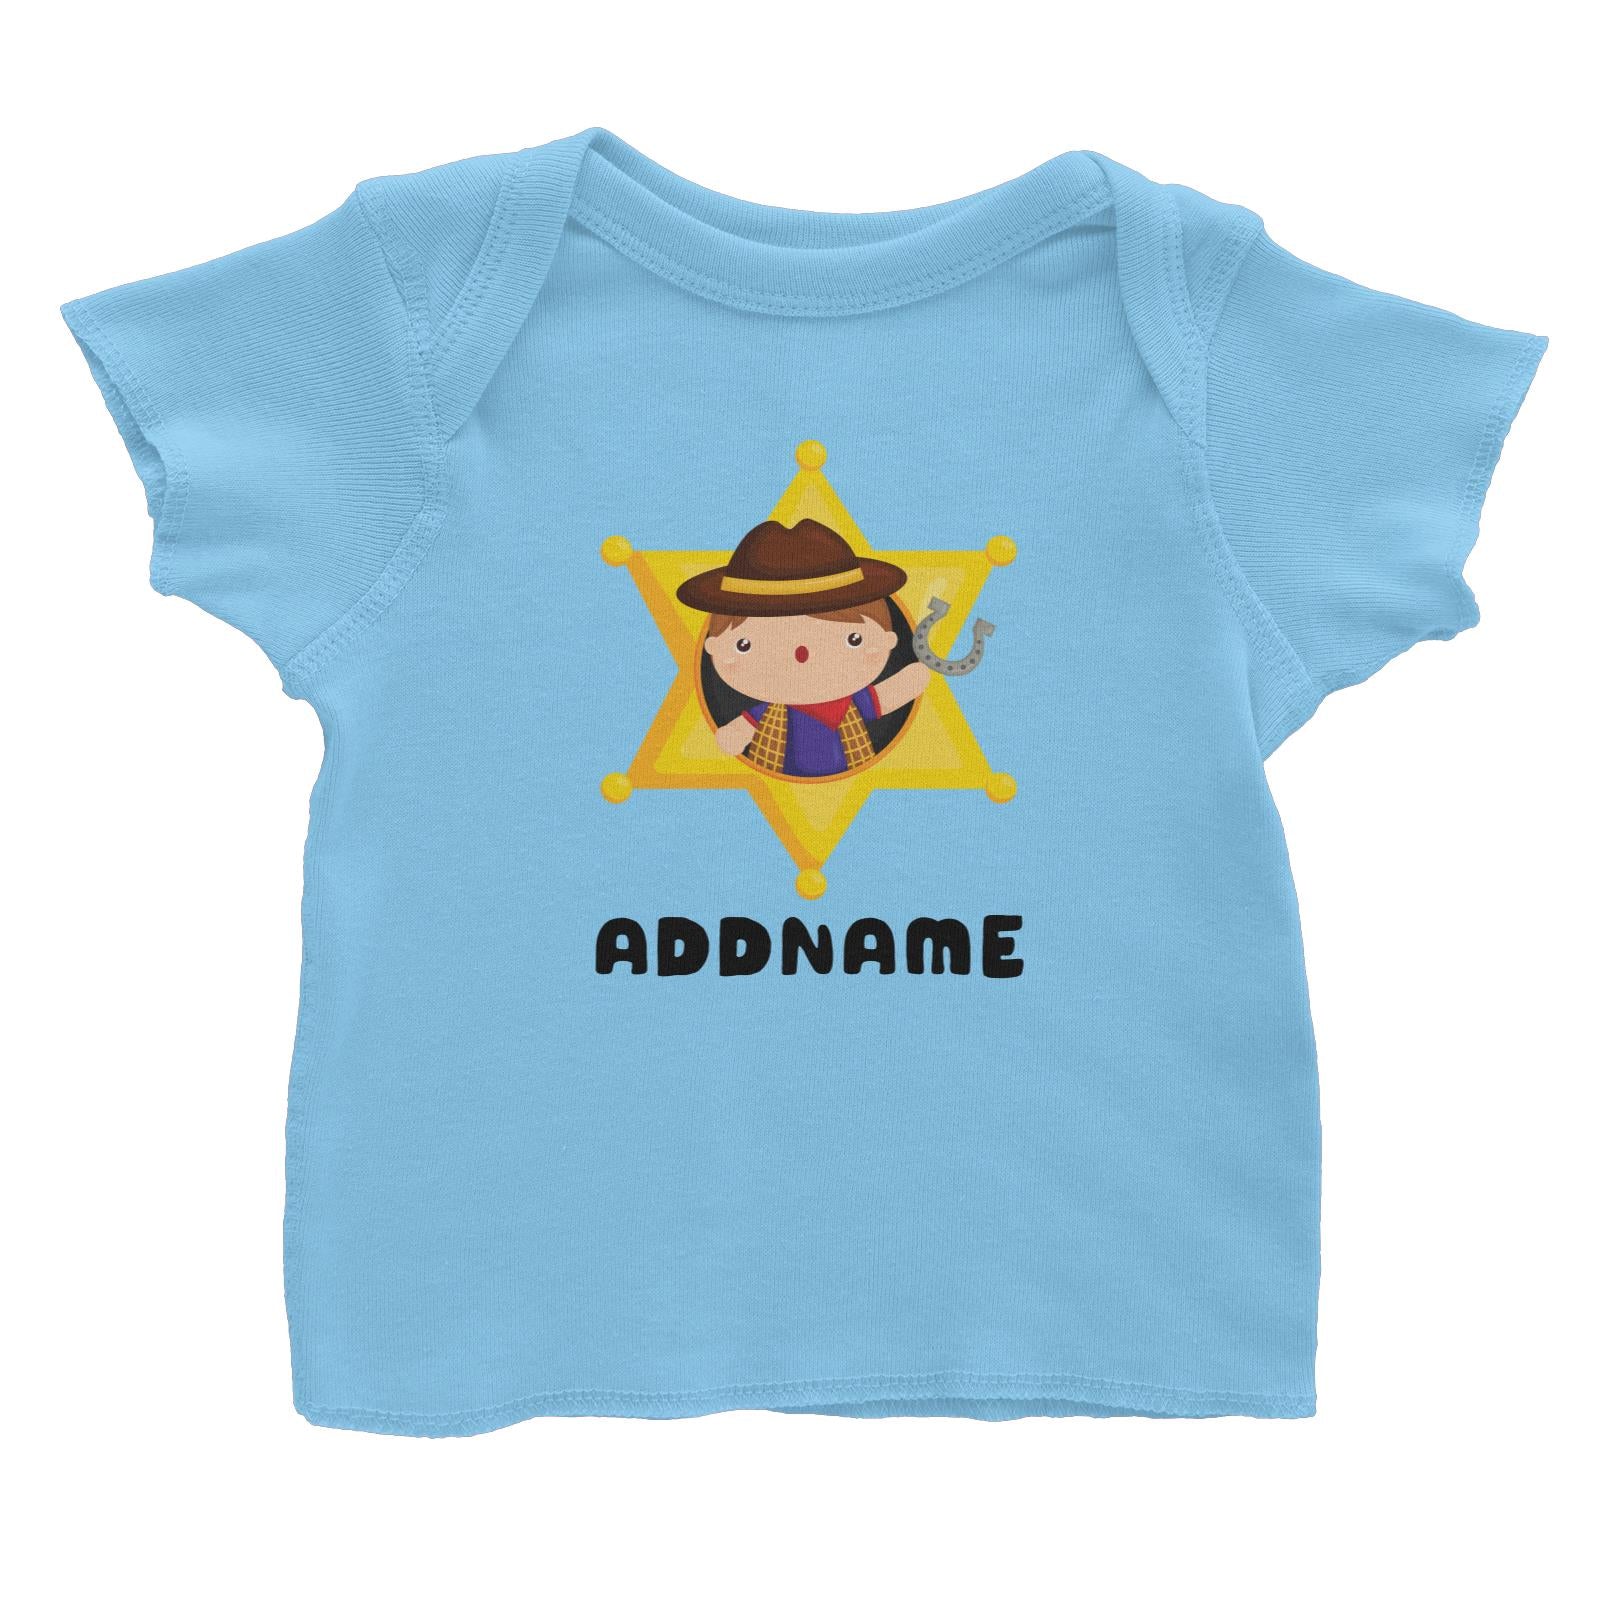 Birthday Cowboy Style Little Cowboy Holding Hoe In Star Badge Addname Baby T-Shirt